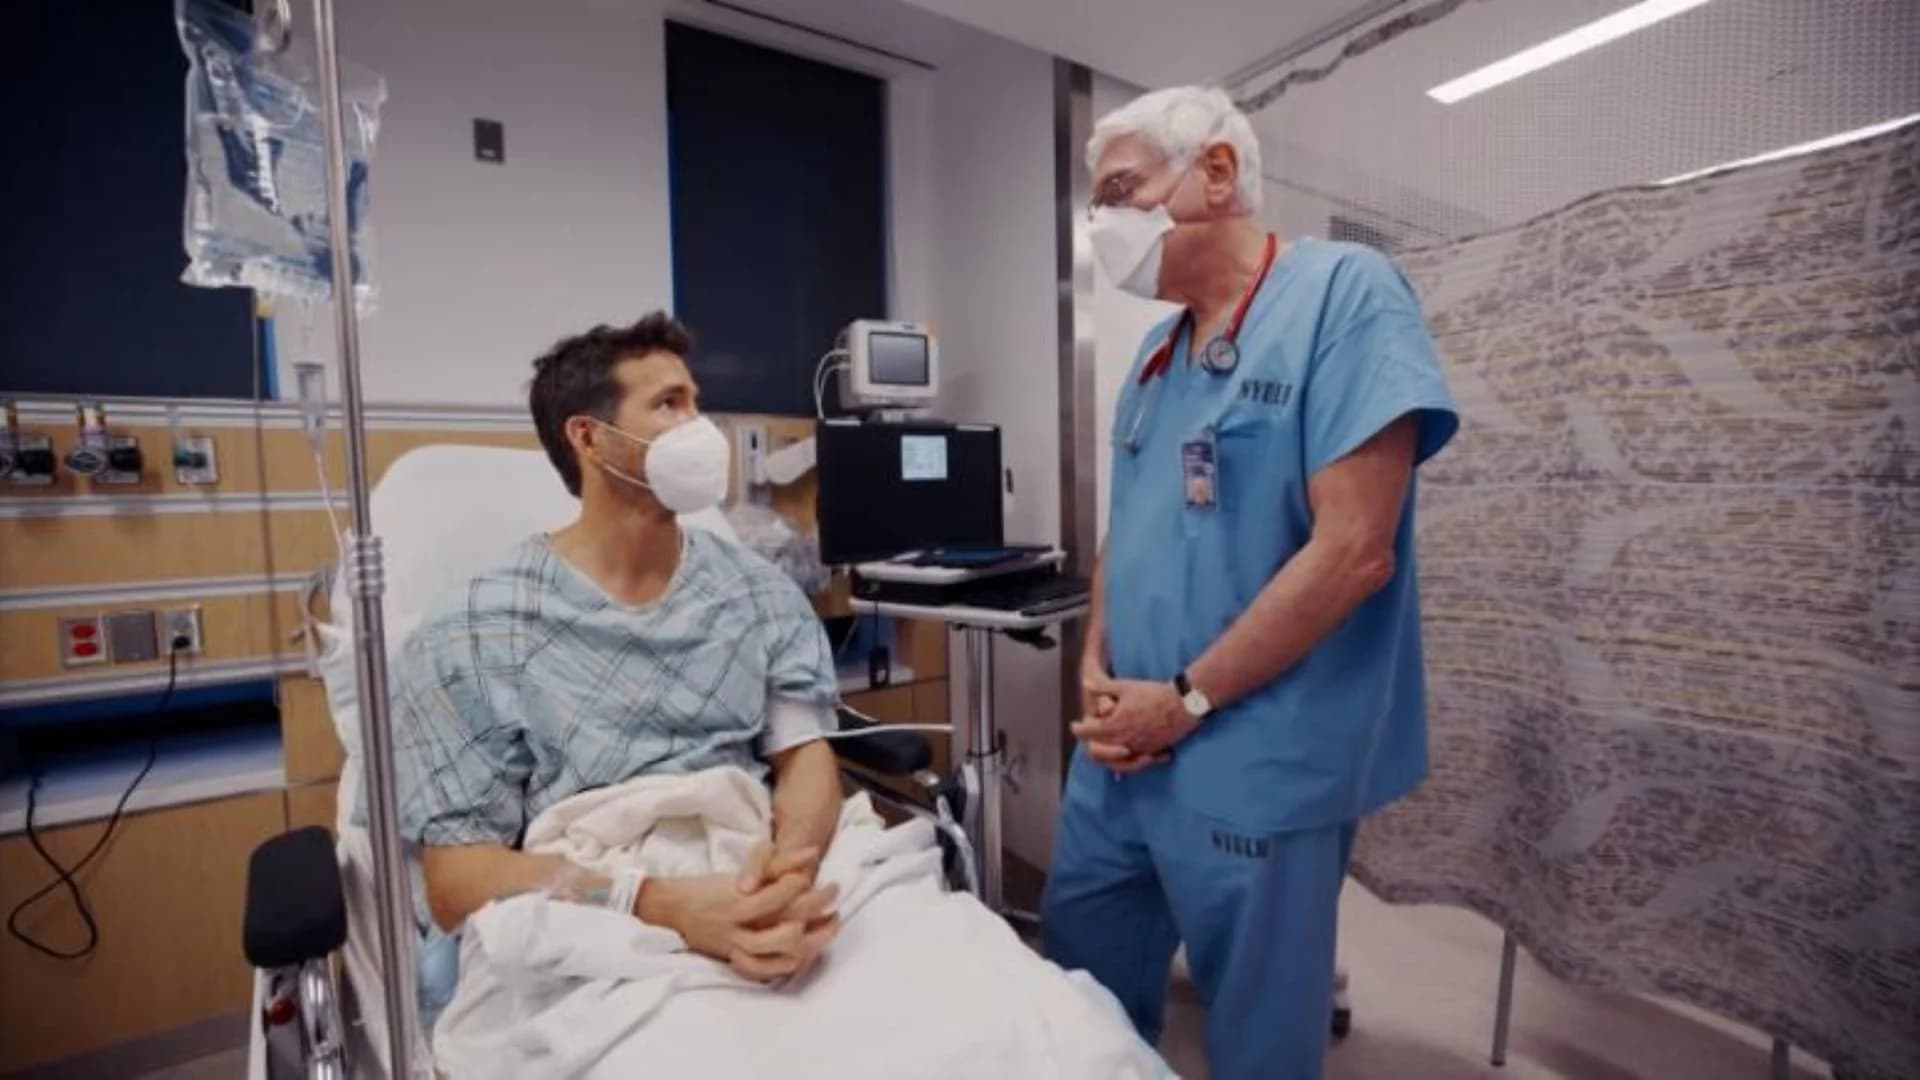 What’s Hot: Ryan Reynolds and Rob McElhenney get a colonoscopy on camera